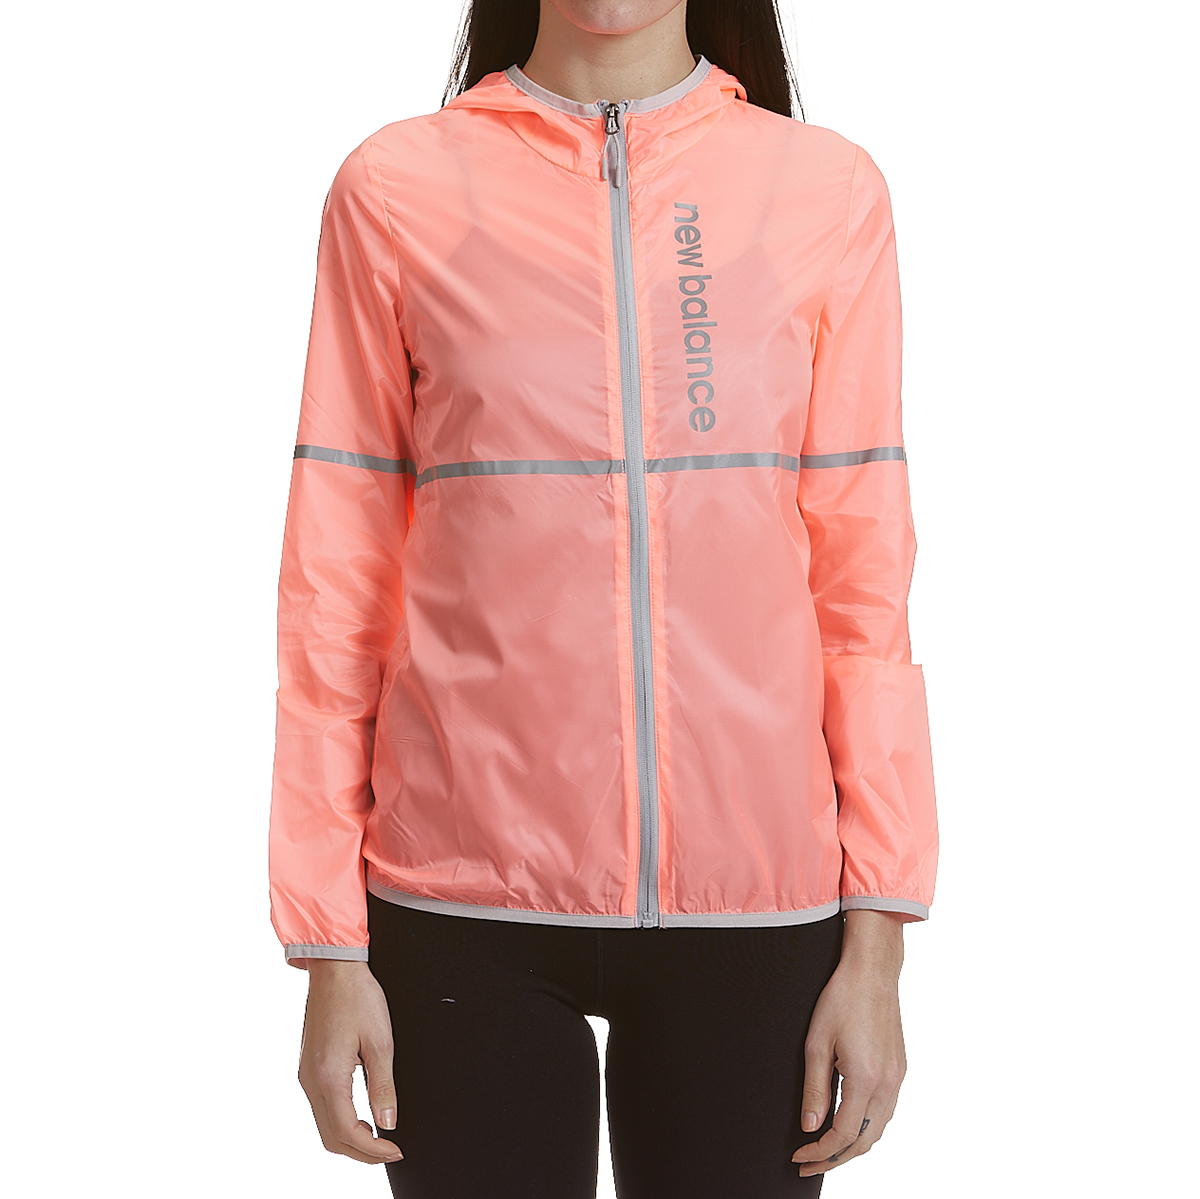 New Balance Women's Translucent Ribstop Hooded Jacket With Reflective Trim - Red, L